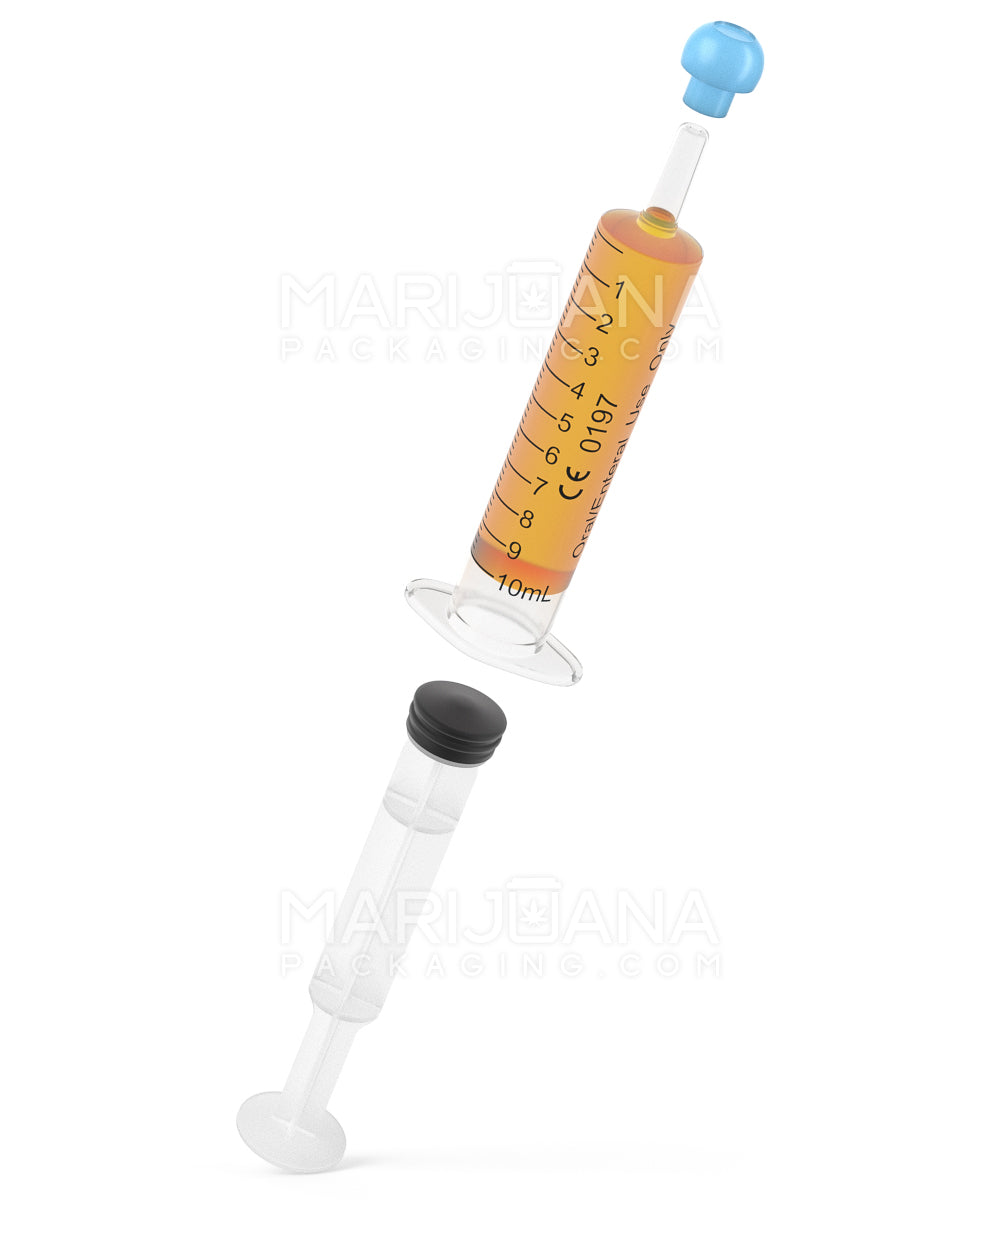 Plastic Oral Concentrate Syringes | 10mL - 1mL Increments - 100 Count - 7